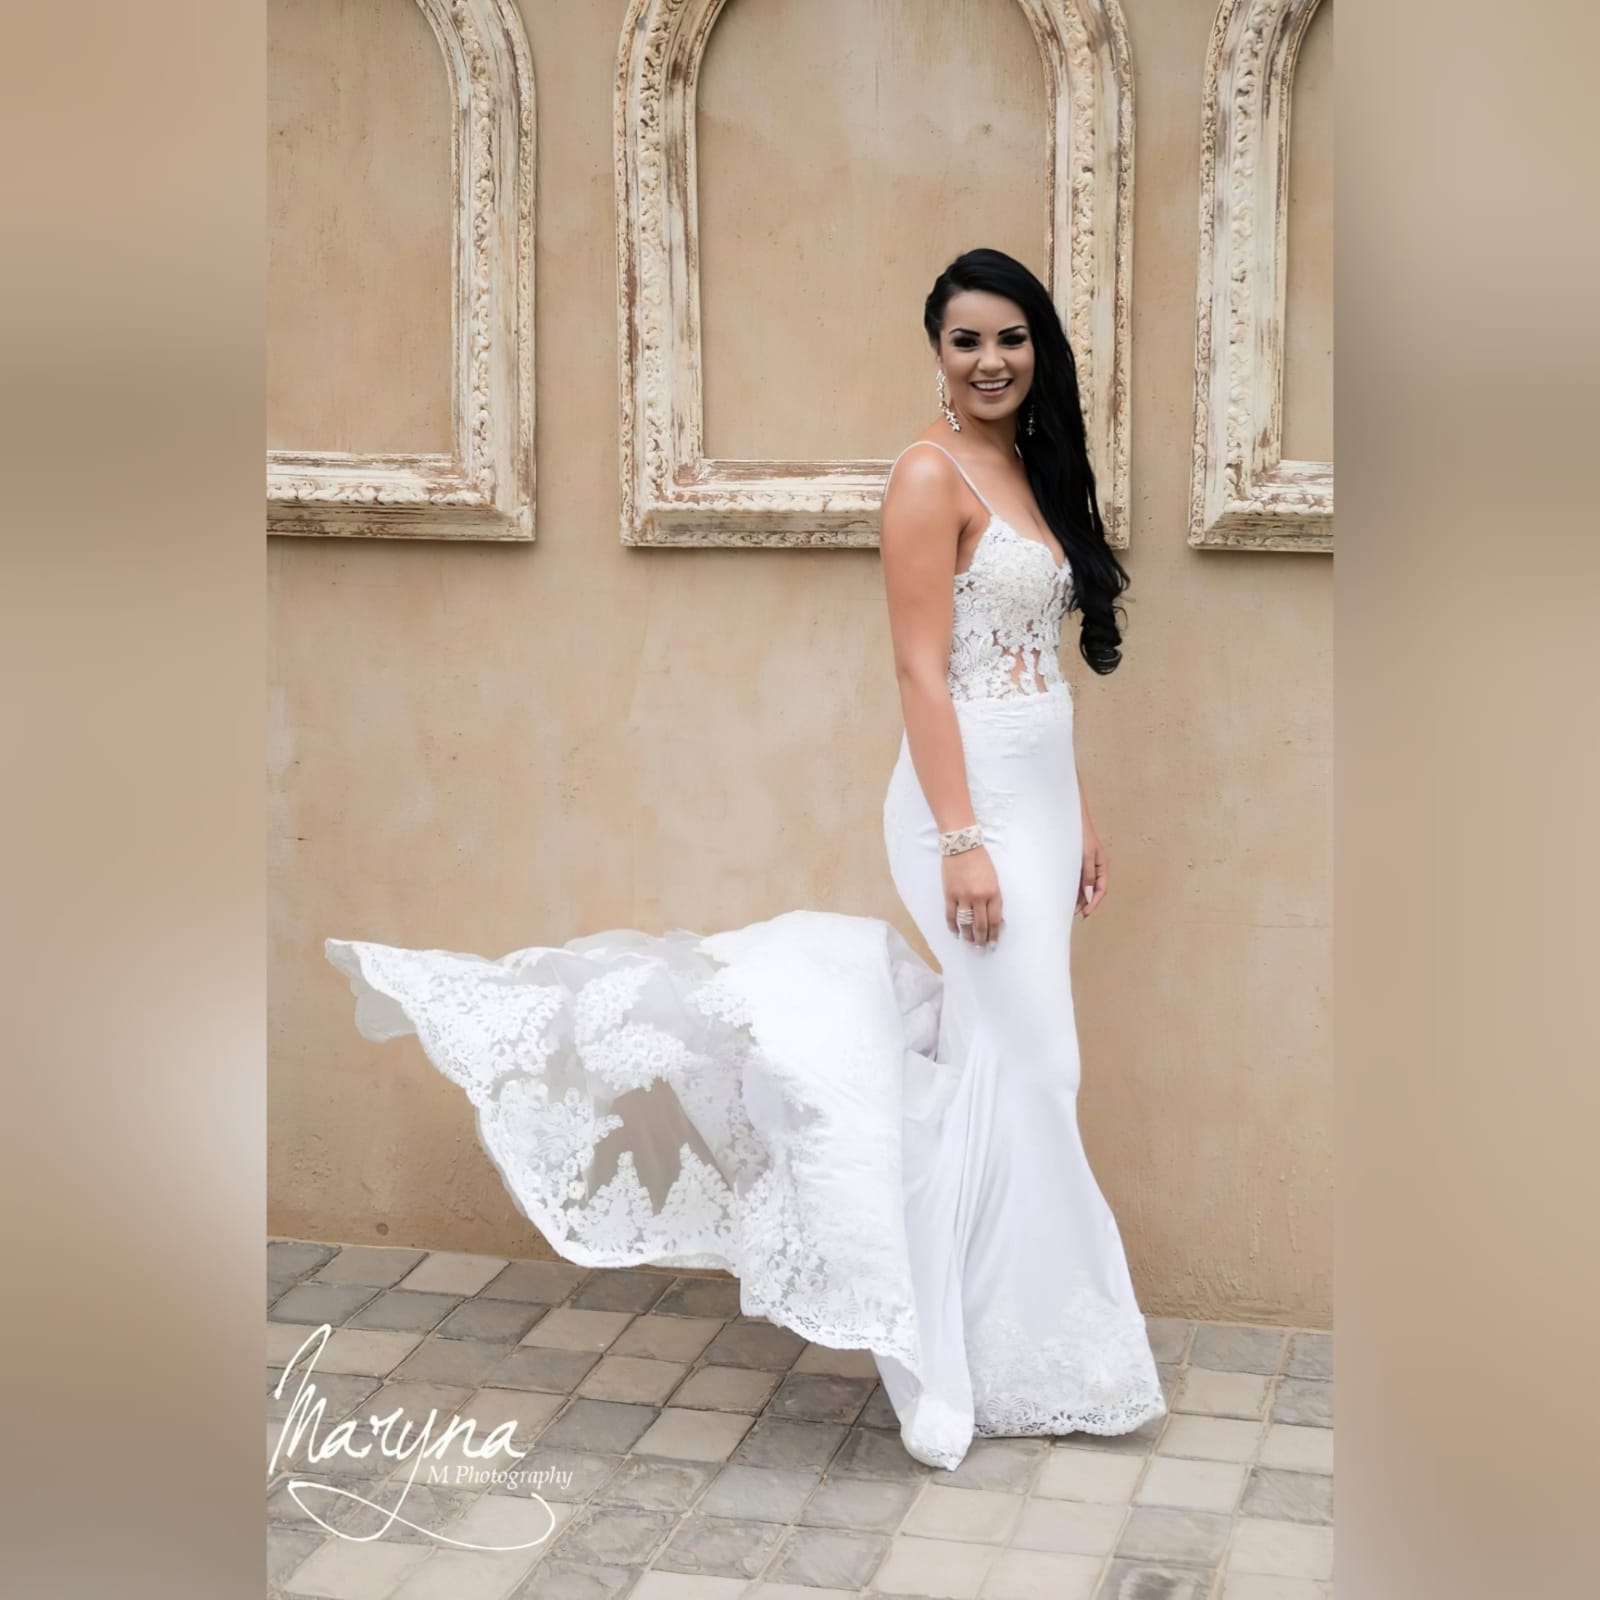 White lace mermaid wedding dress with lace train 8 white lace mermaid wedding dress, lace bodice with a v neckline, low open back and thin shoulder straps detailed with diamante. Lace from the waist down, creating a long sheer lace train. With a train hookup and a matching garter.